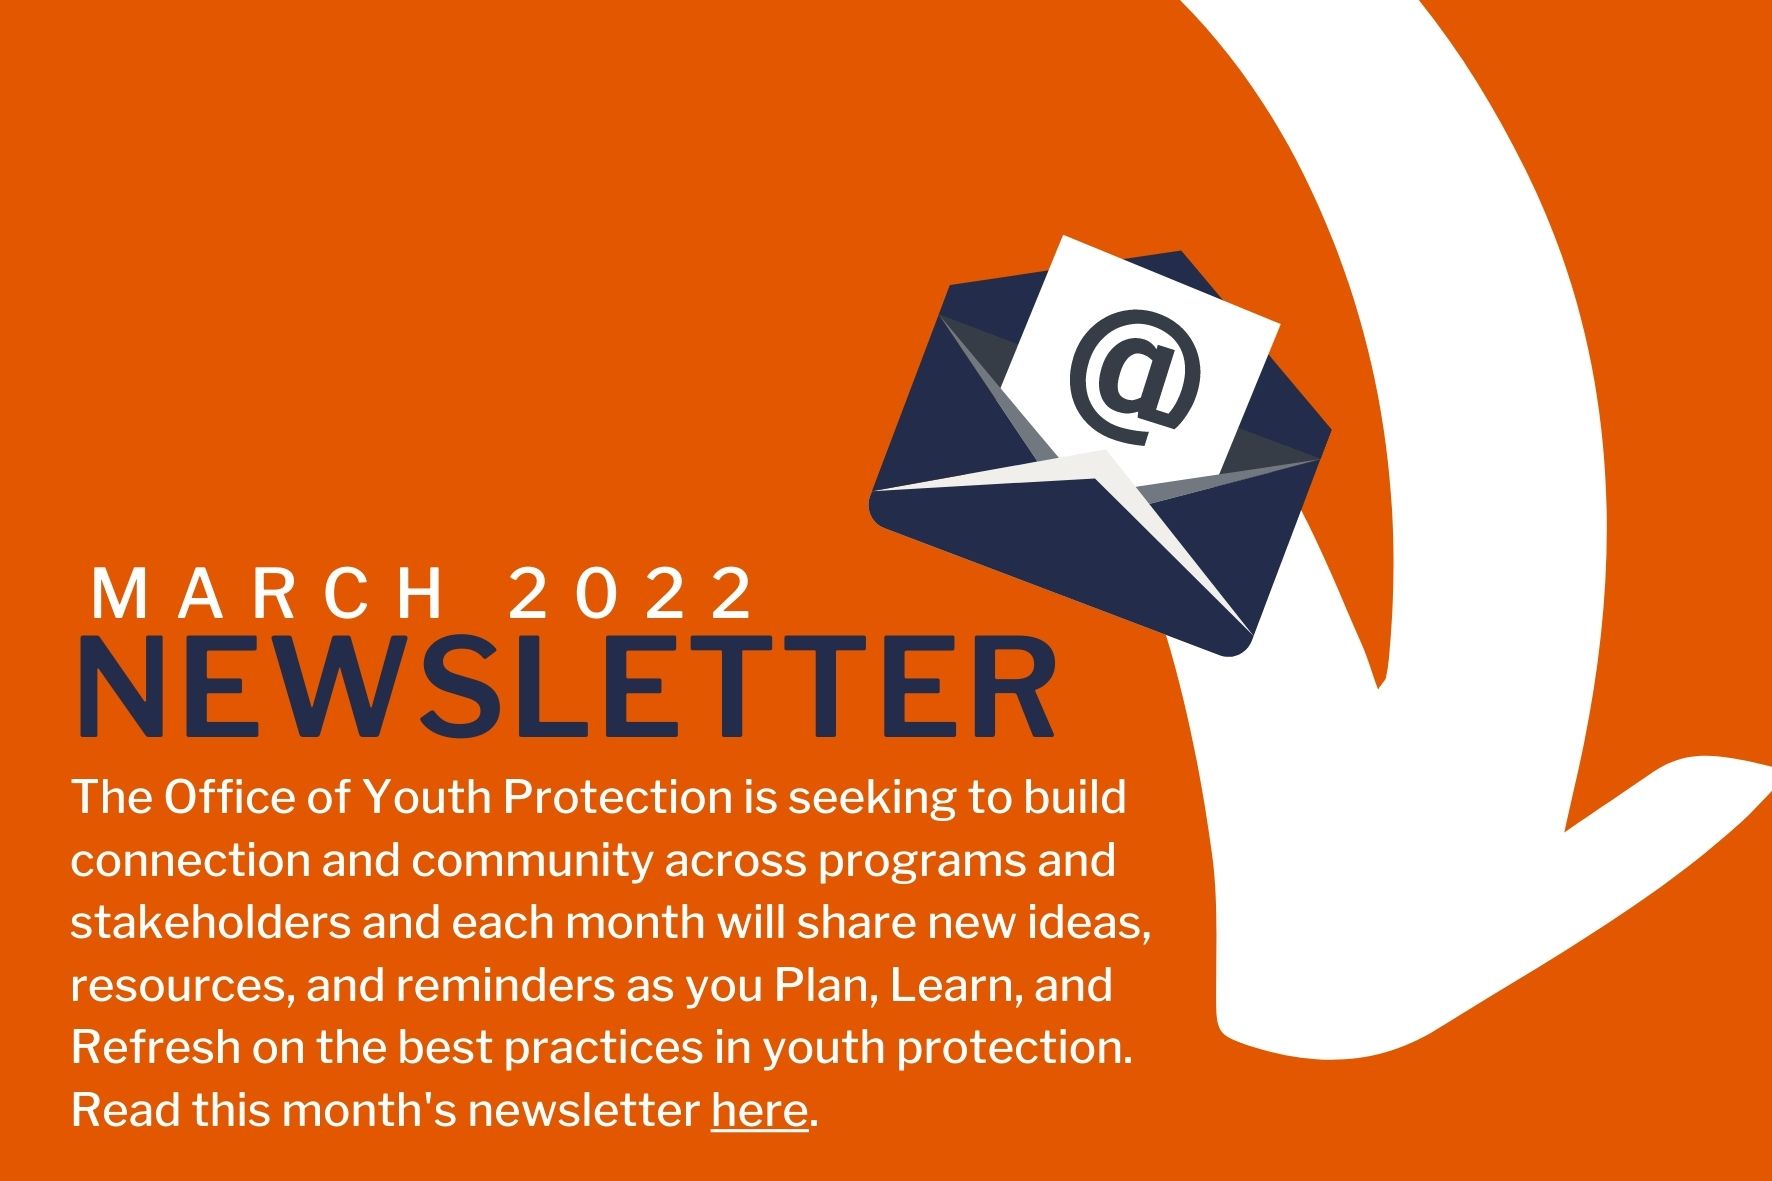 Orange background, white text advertising March 2022 newsletter from the Office of Youth Protection; click image or link to read newsletter.